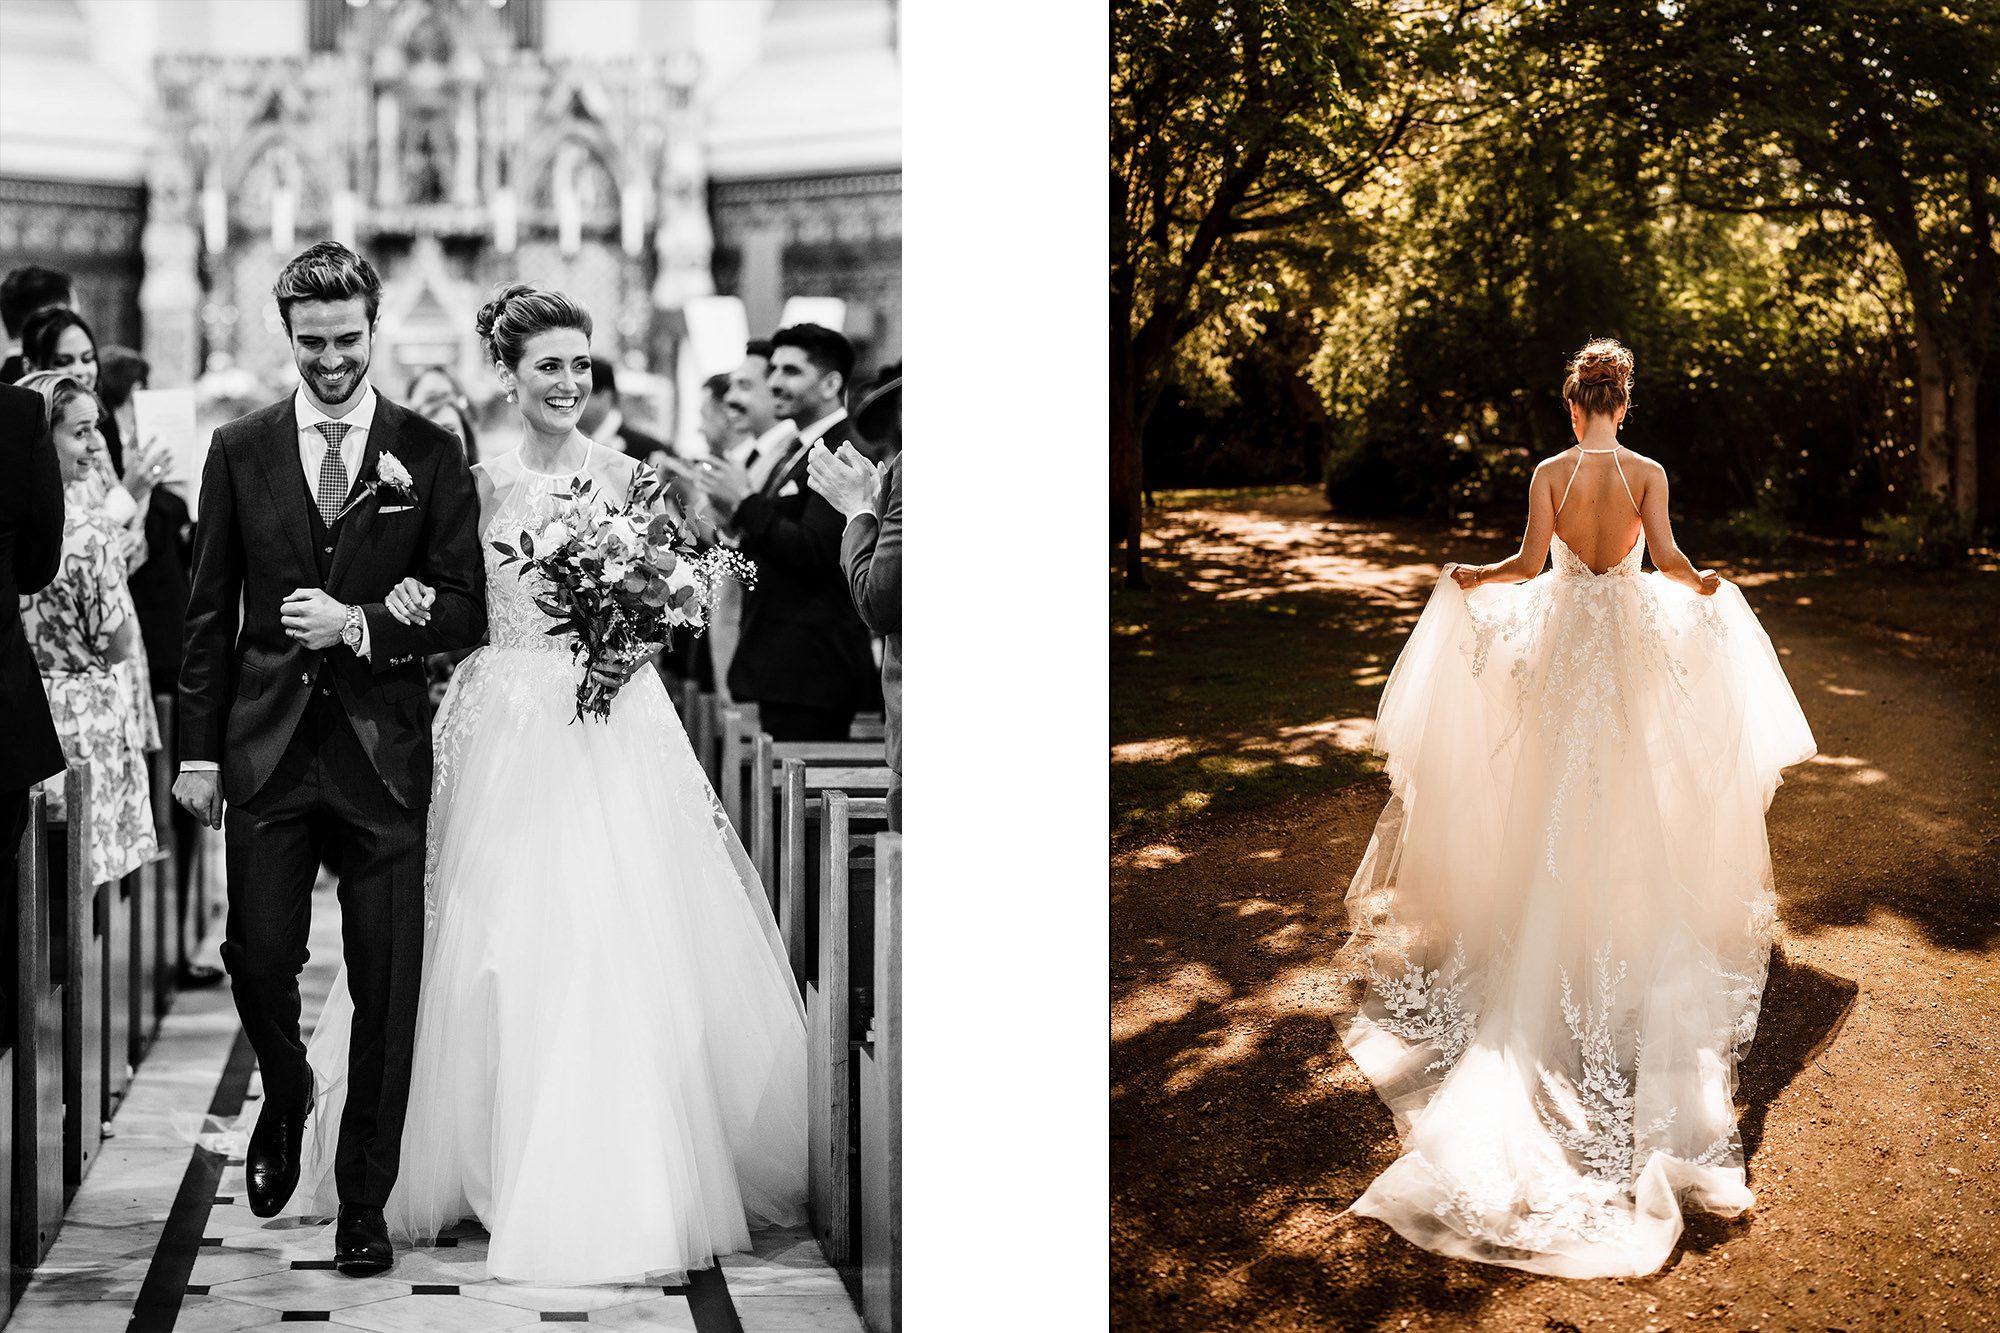 Two wedding images by Stephen Walker photography. A couple walk back down the aisle smiling and looking at their guests. A bride lifts the long skirt of her dress to walk in the sunlight.